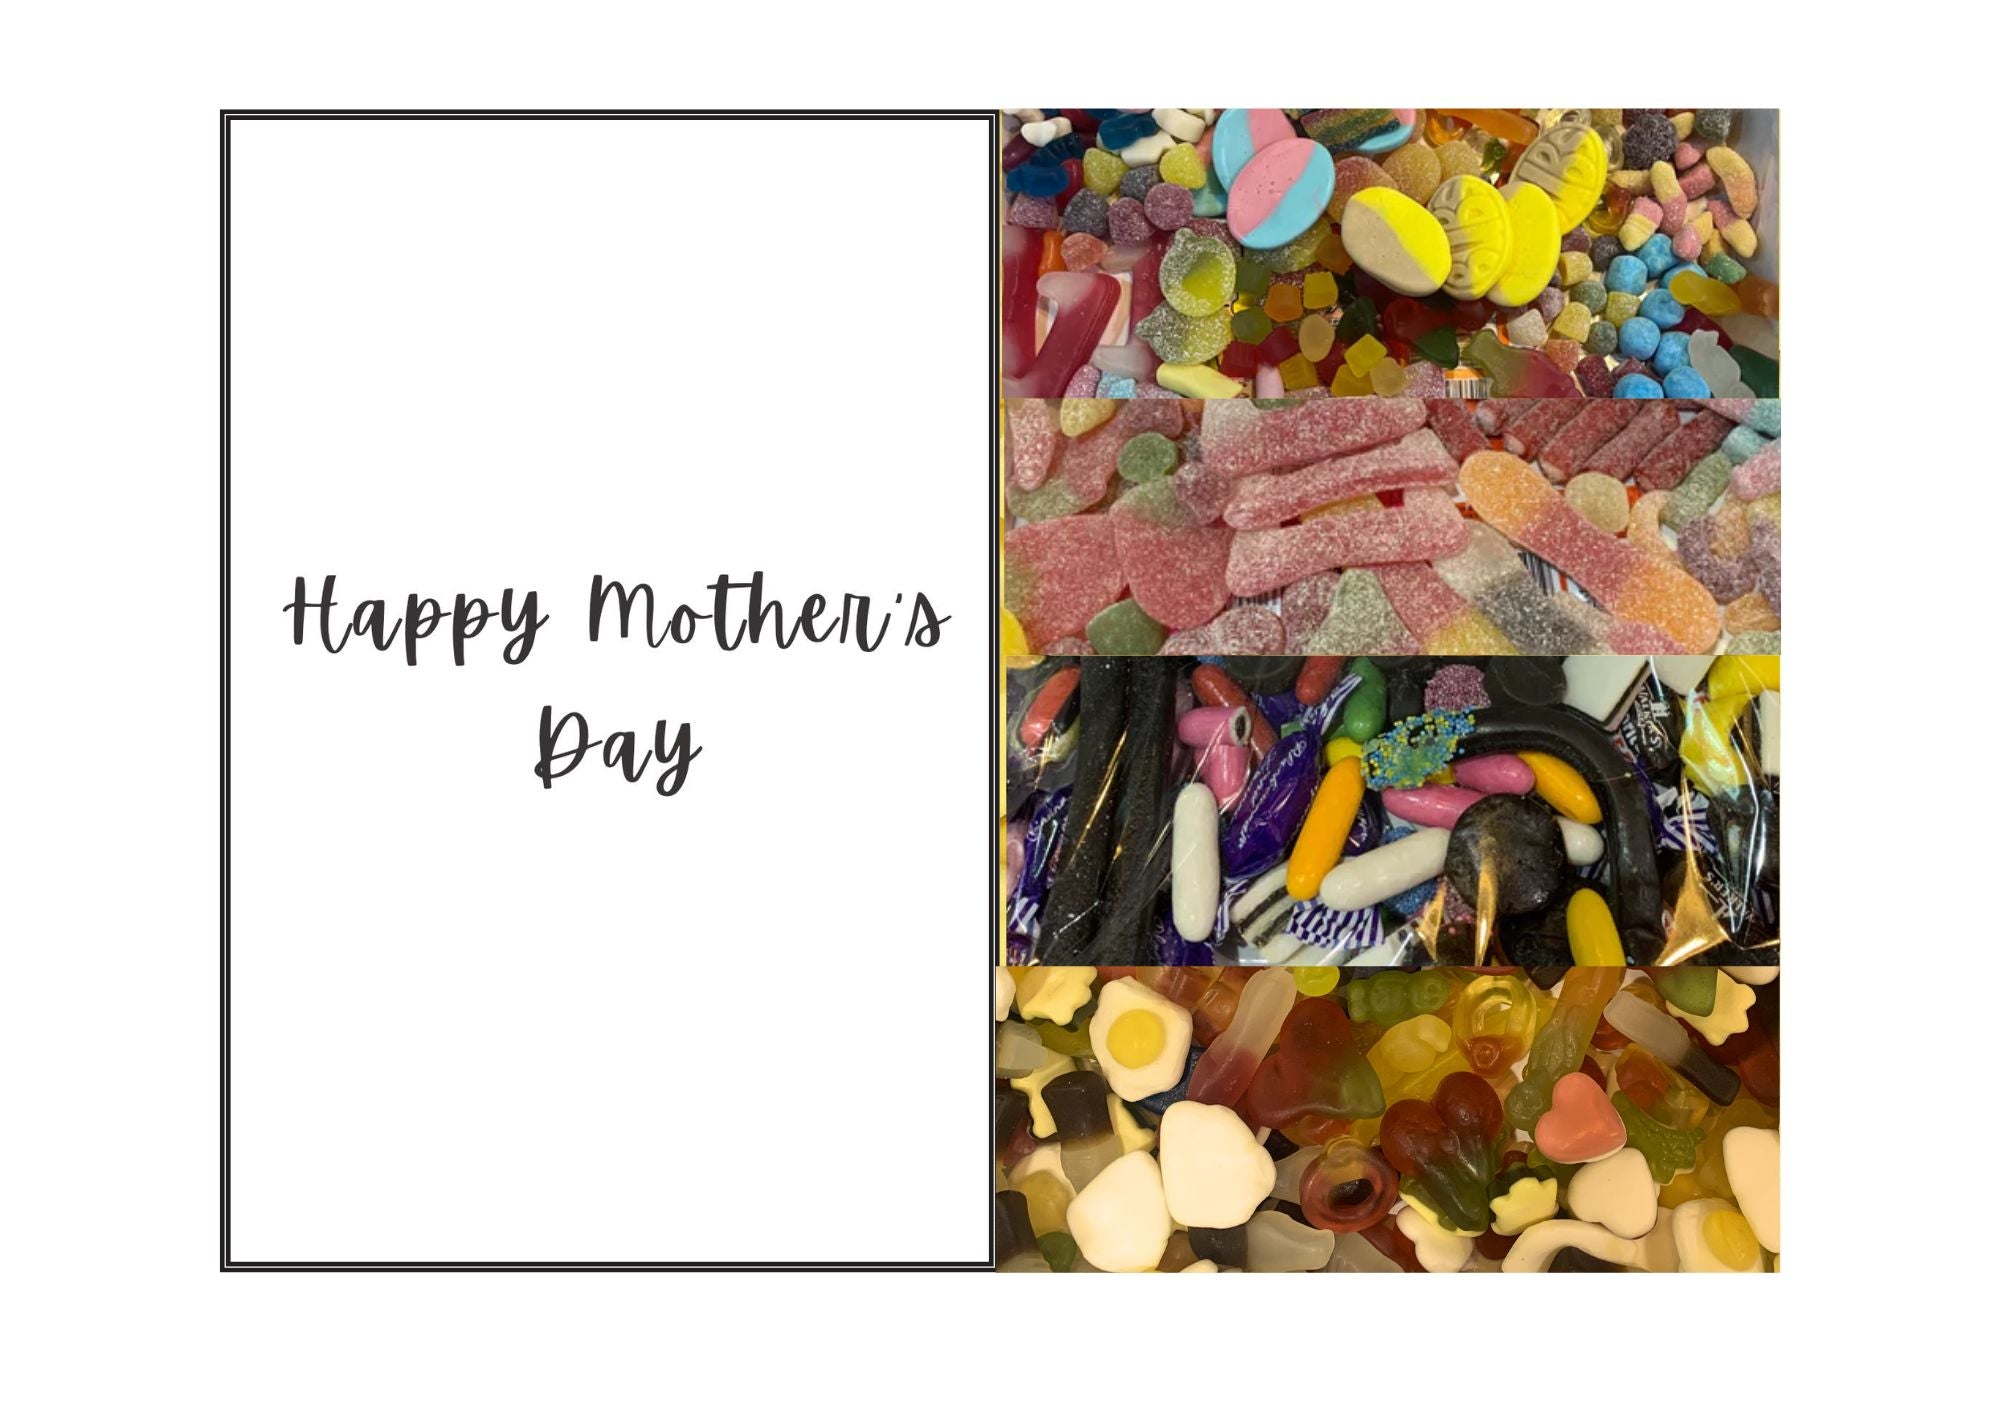 Happy Mother's Day (Heart) - Sweet Card